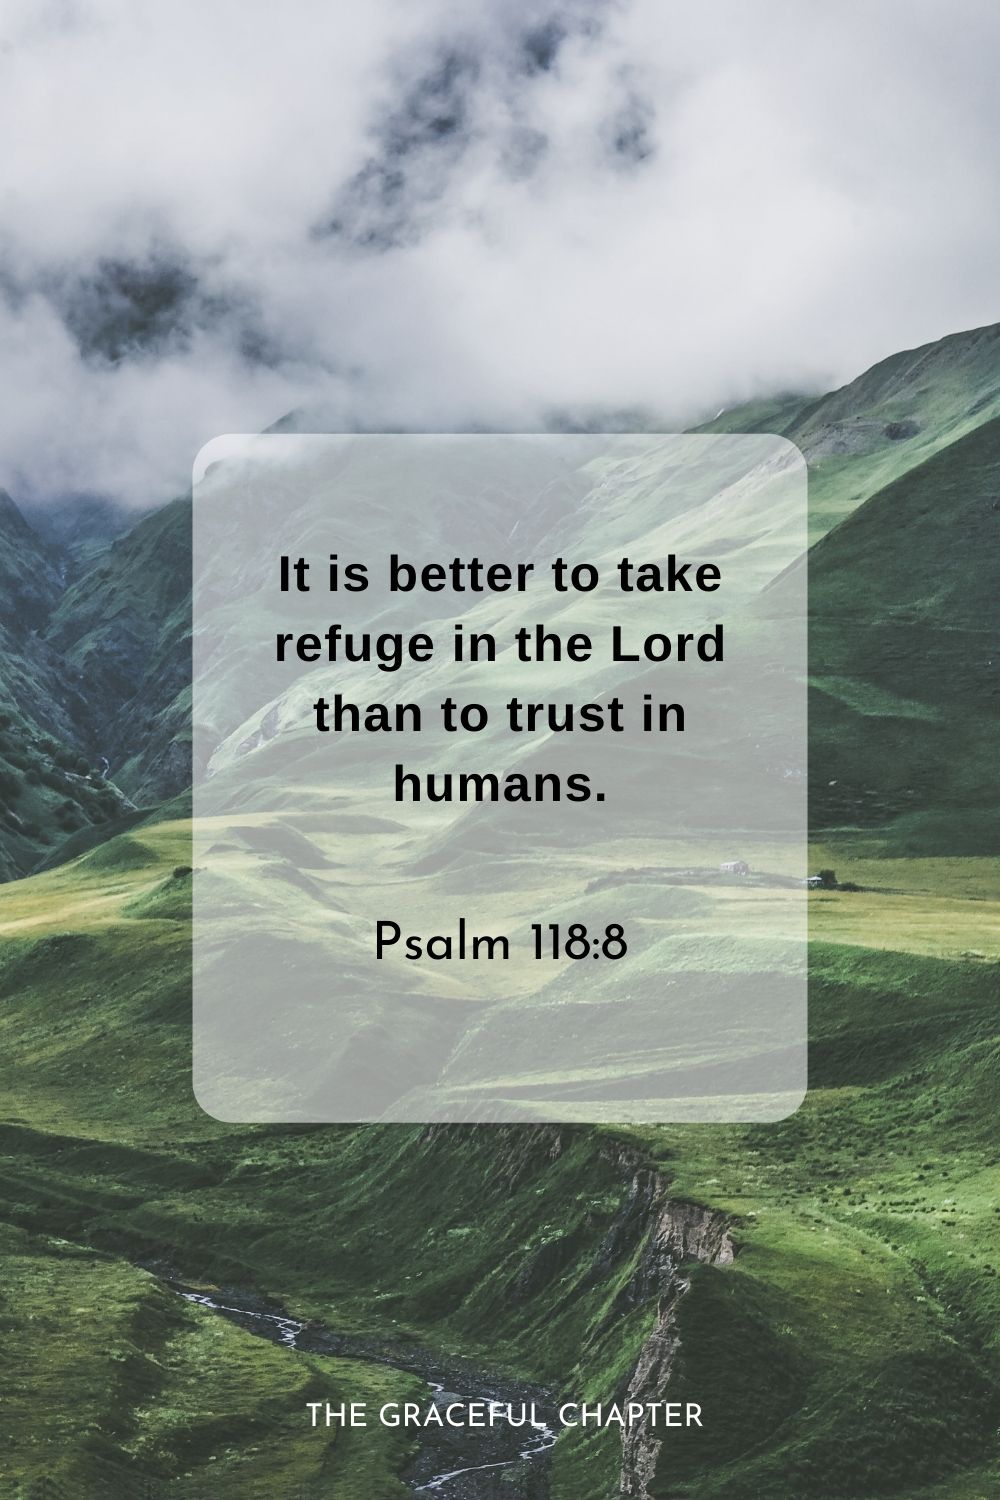 It is better to take refuge in the Lord than to trust in humans.